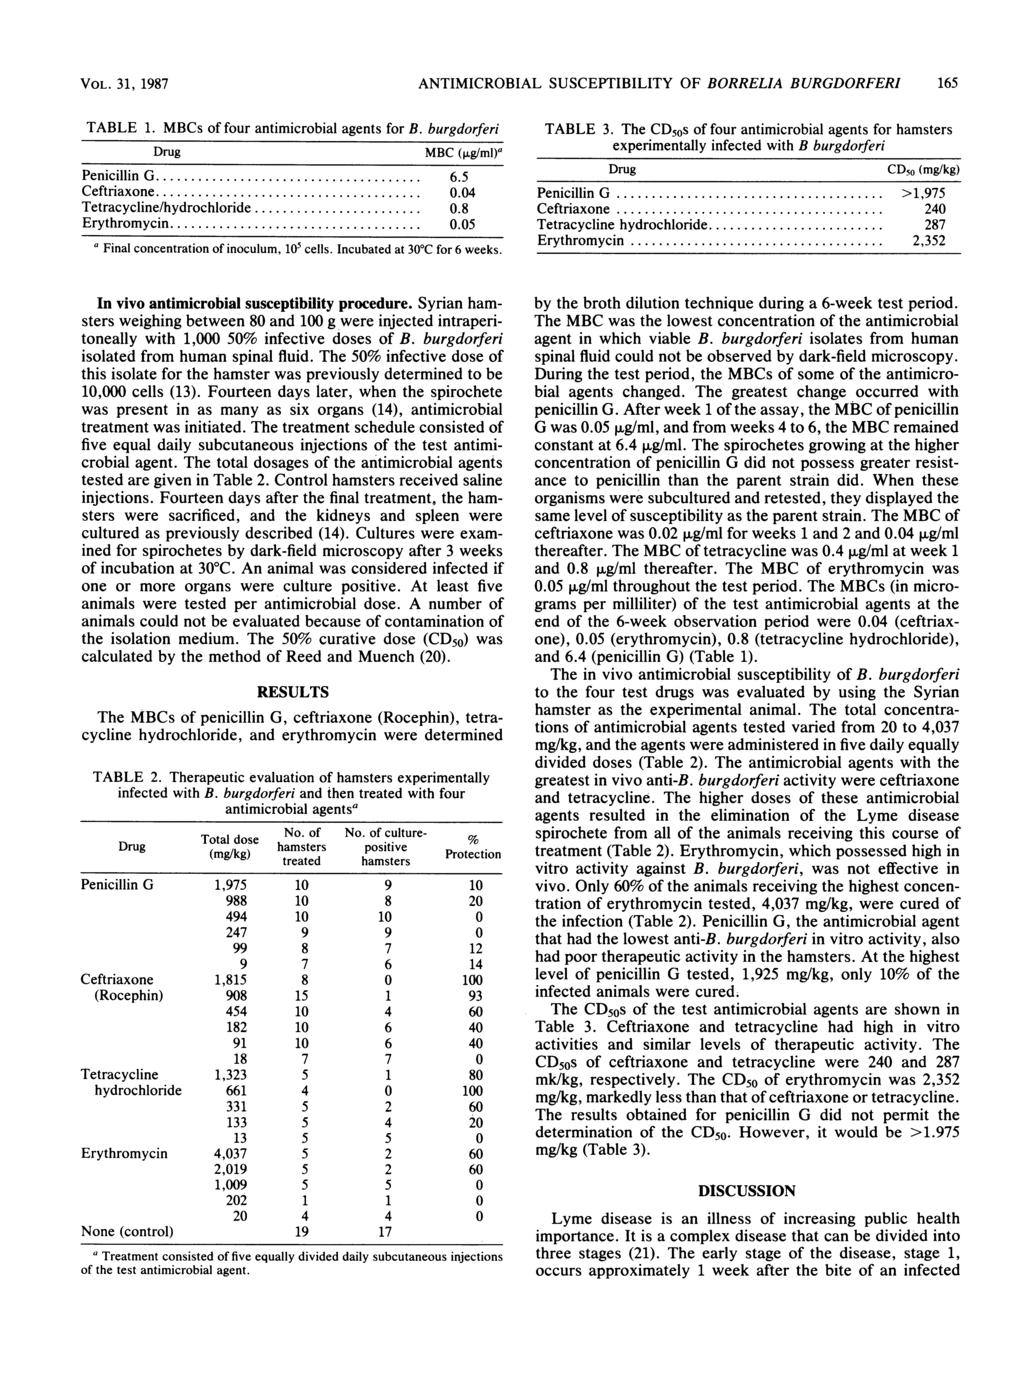 VOL. 31, 1987 ANTIMICROBIAL SUSCEPTIBILITY OF BORRELIA BURGDORFERI 165 TABLE 1. MBCs of four antimicrobial agents for B. burgdorferi Drug MBC (p.g/ml)a Penicillin G... 6.5 Ceftriaxone... 0.